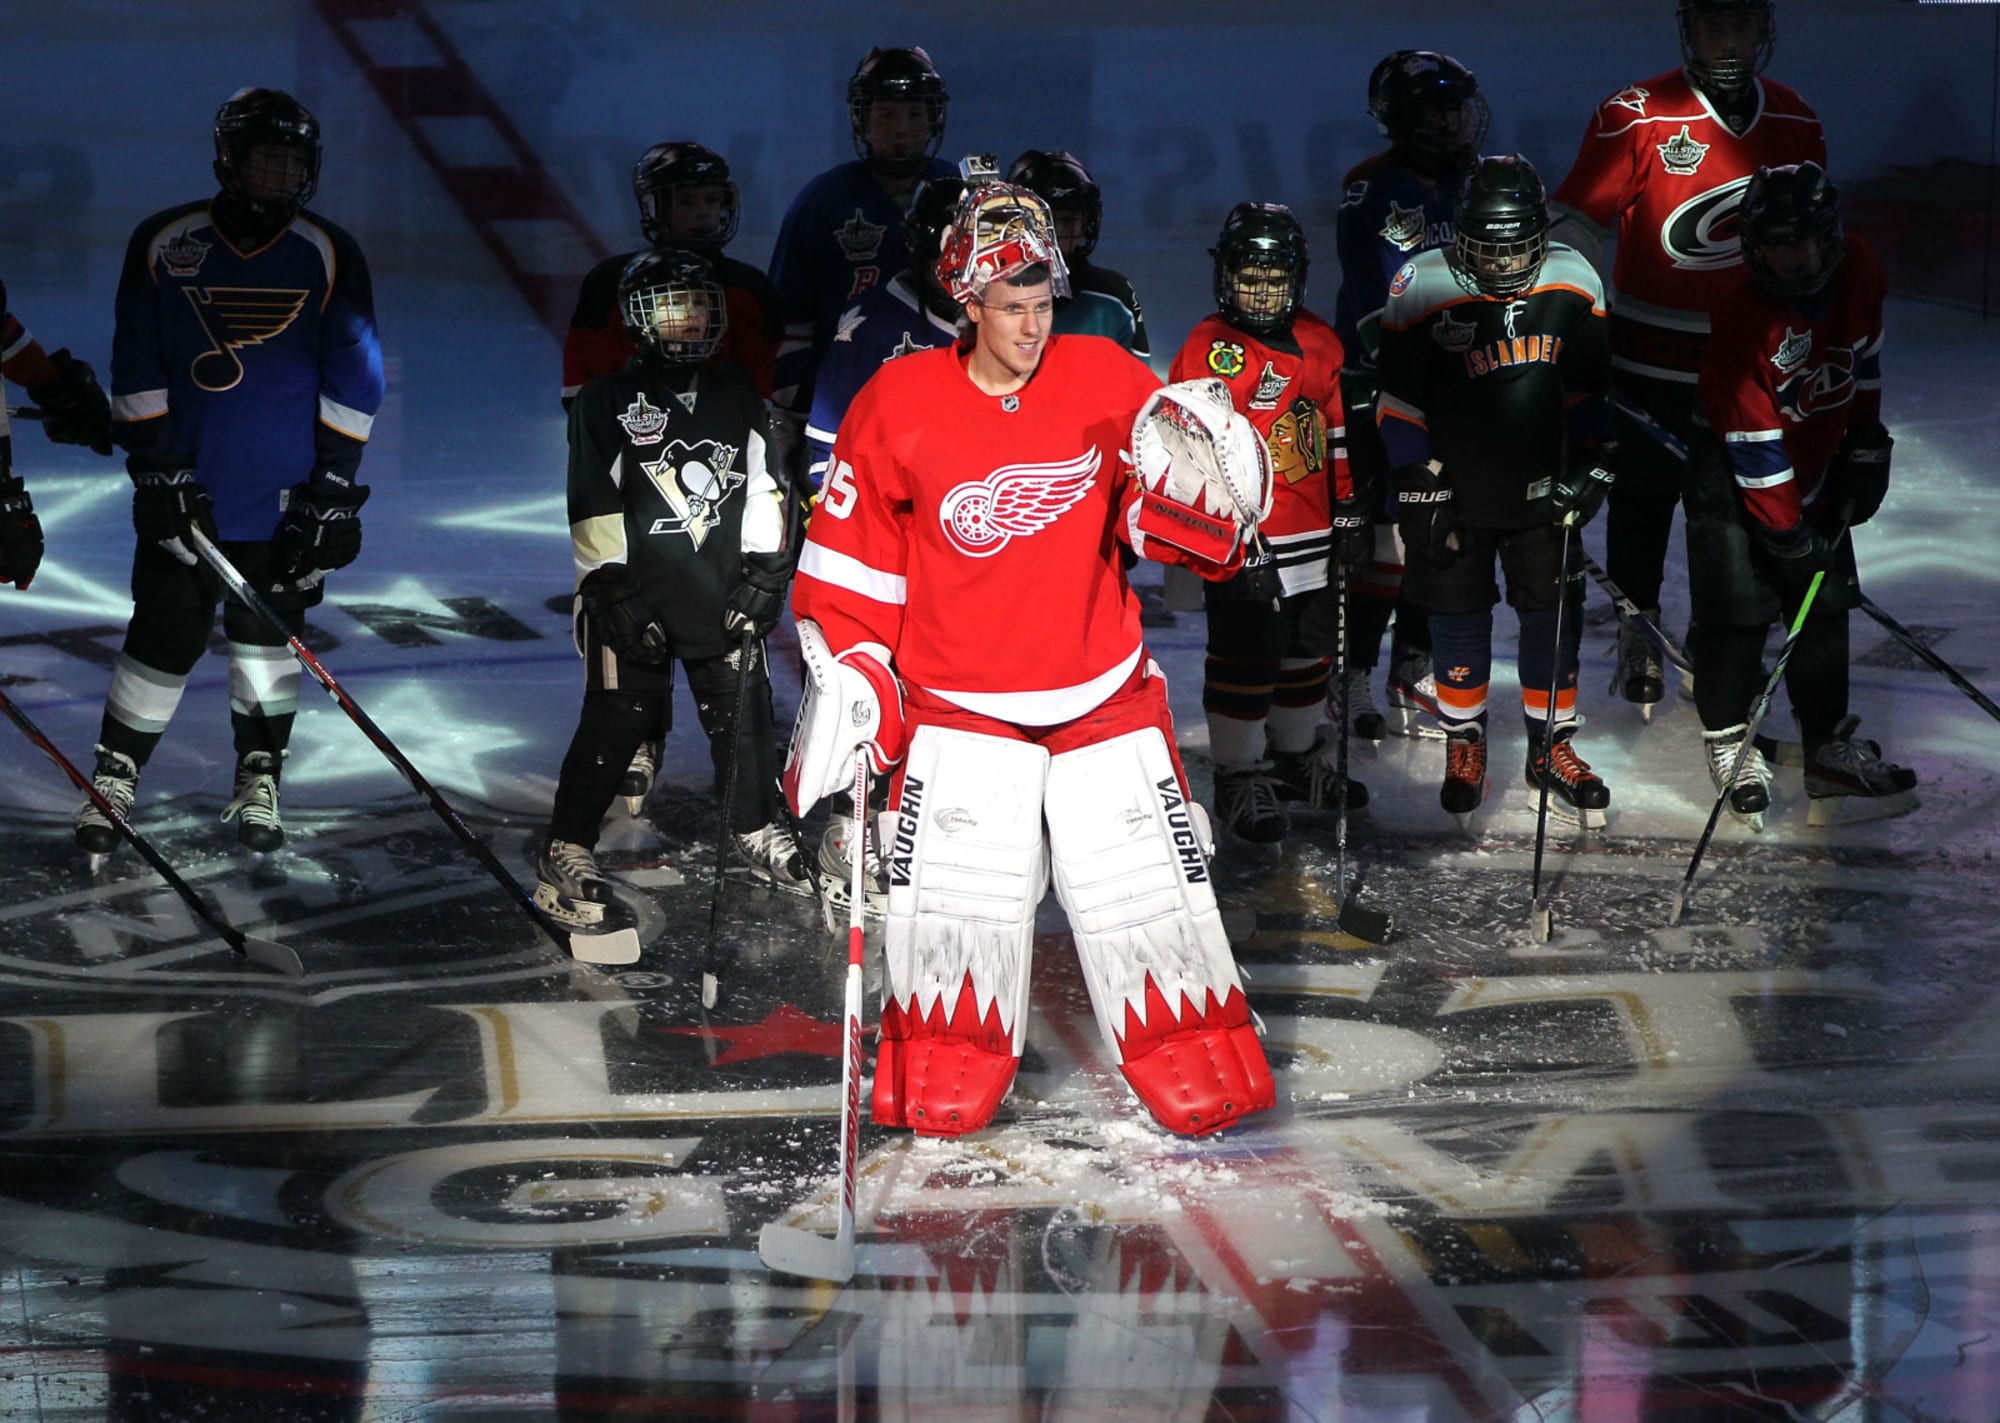 Detroit Red Wings: Jimmy Howard Is Expected to Battle